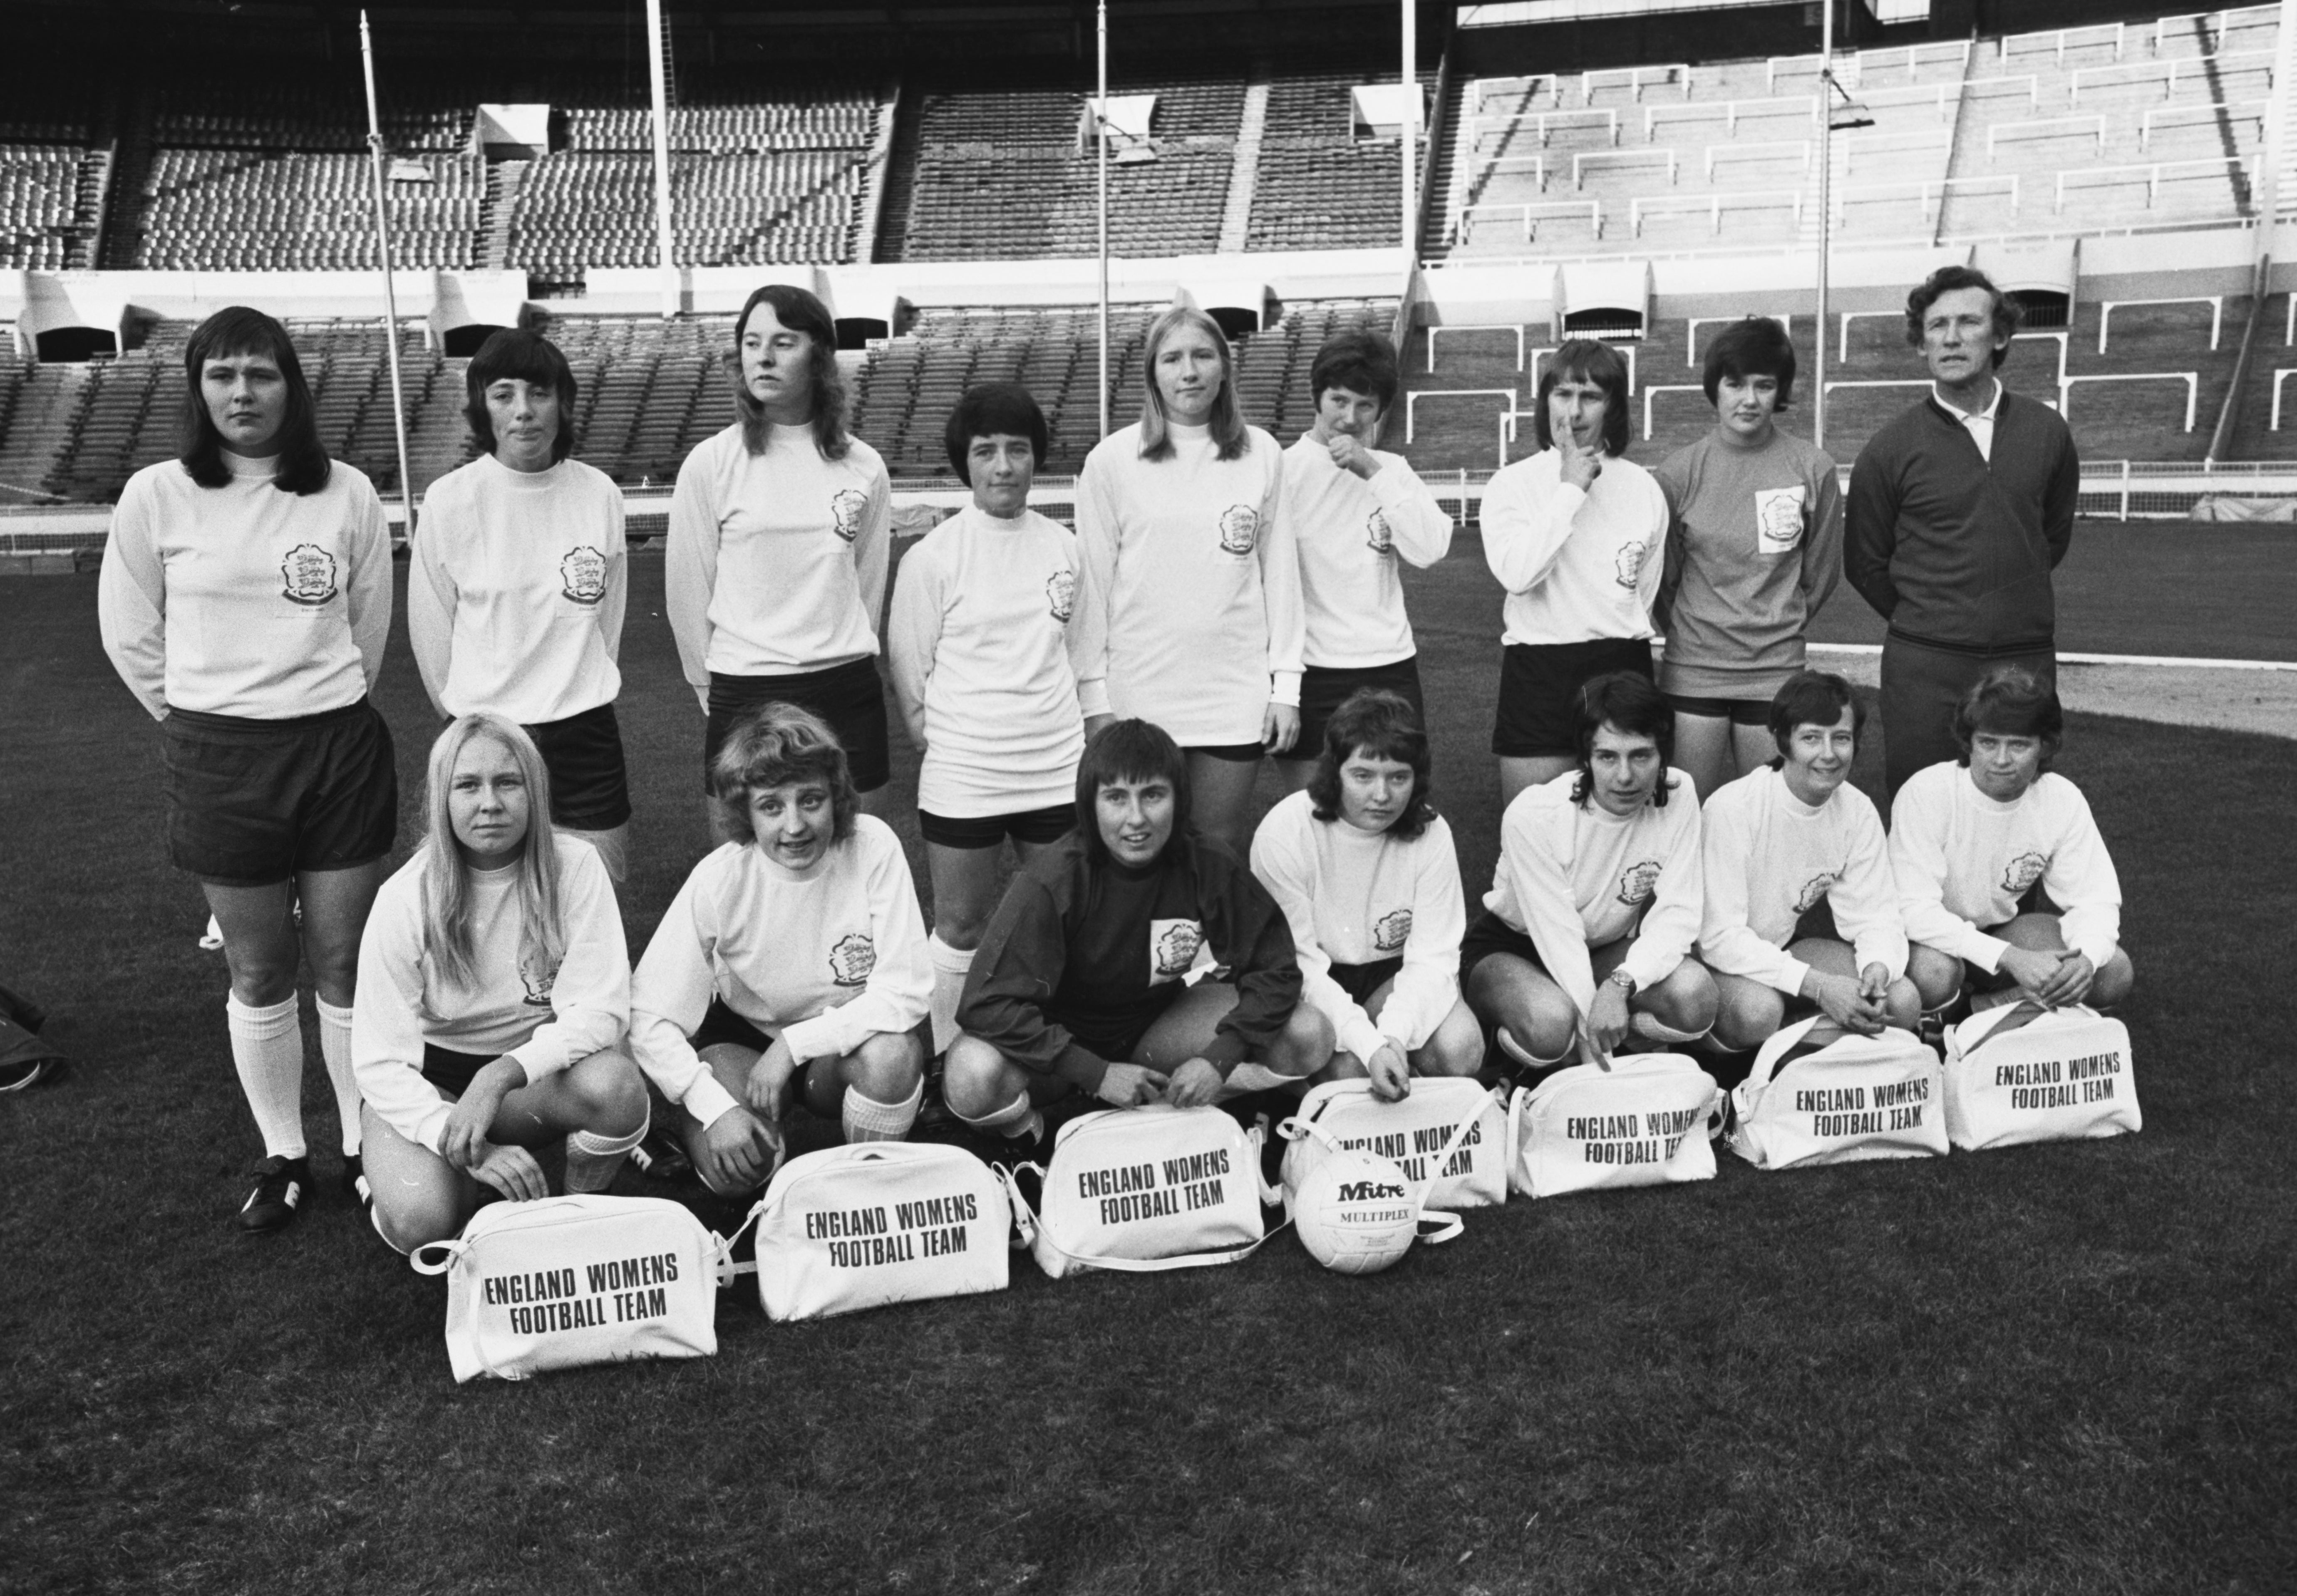 The England women’s national football team pose before the Scotland match in 1972